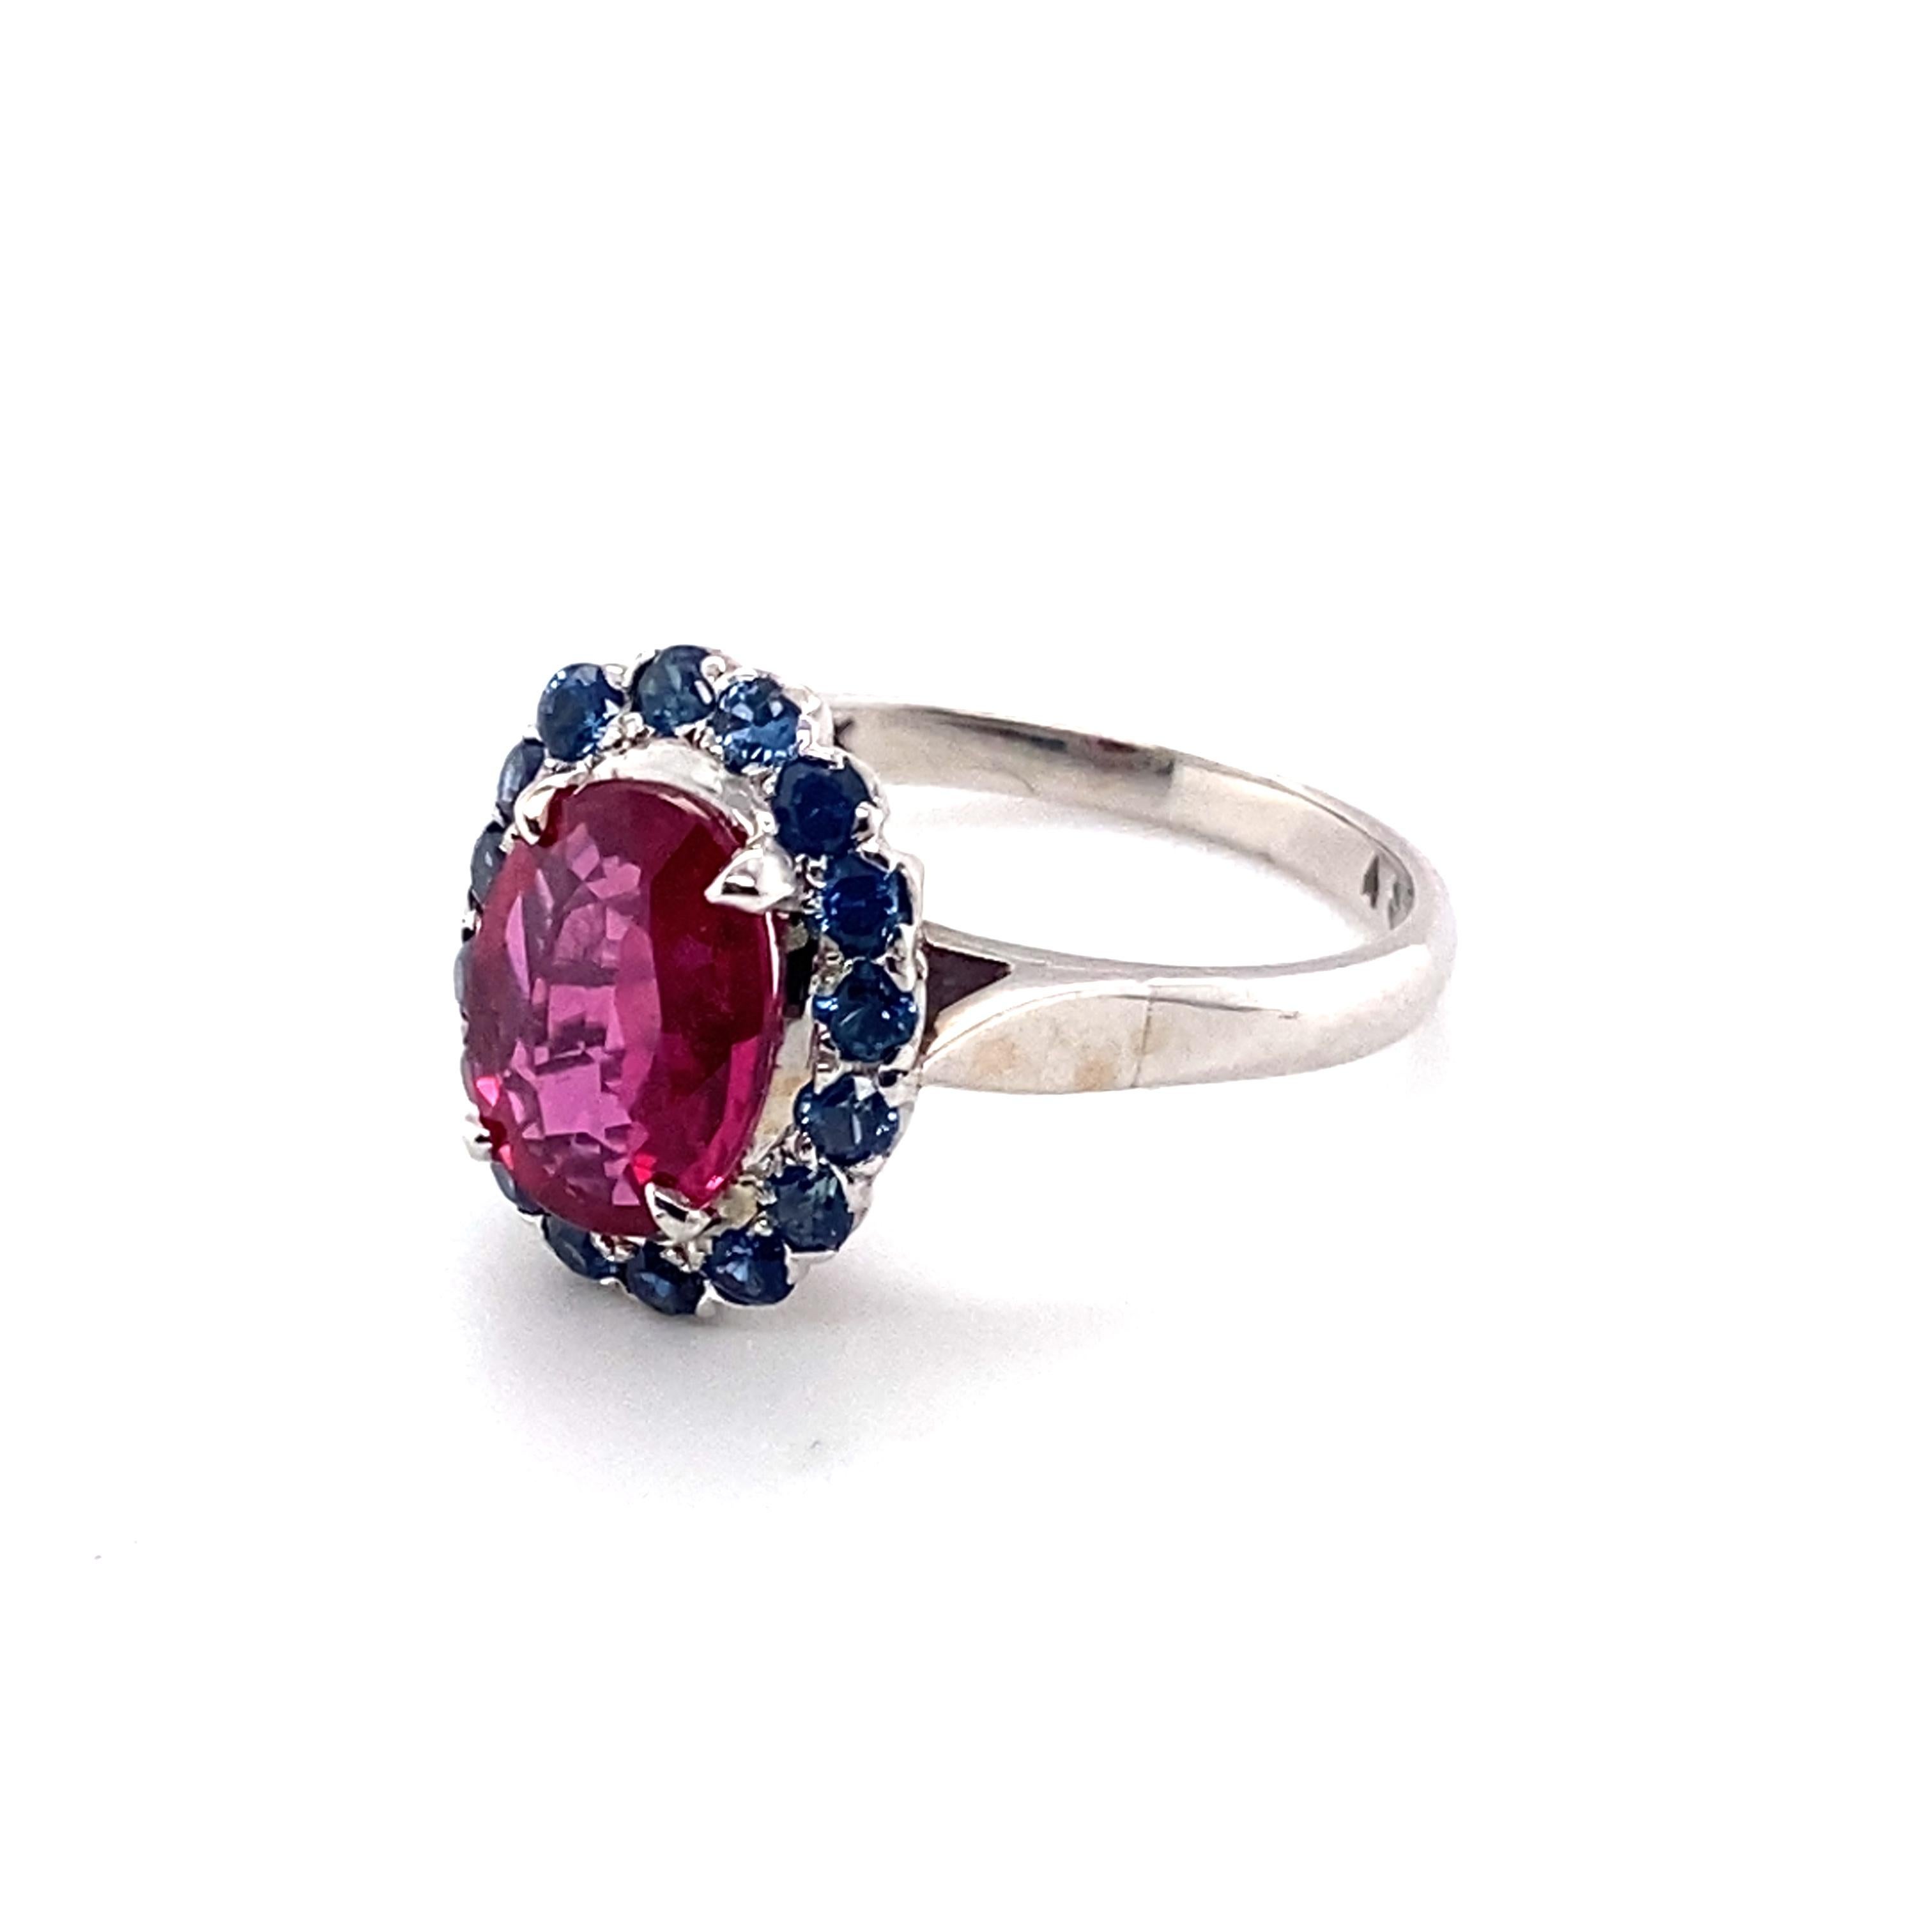 Women's 1.56 Carat Total Ruby and 1.14 Carat Total Sapphire Ring in 14 Karat White Gold For Sale